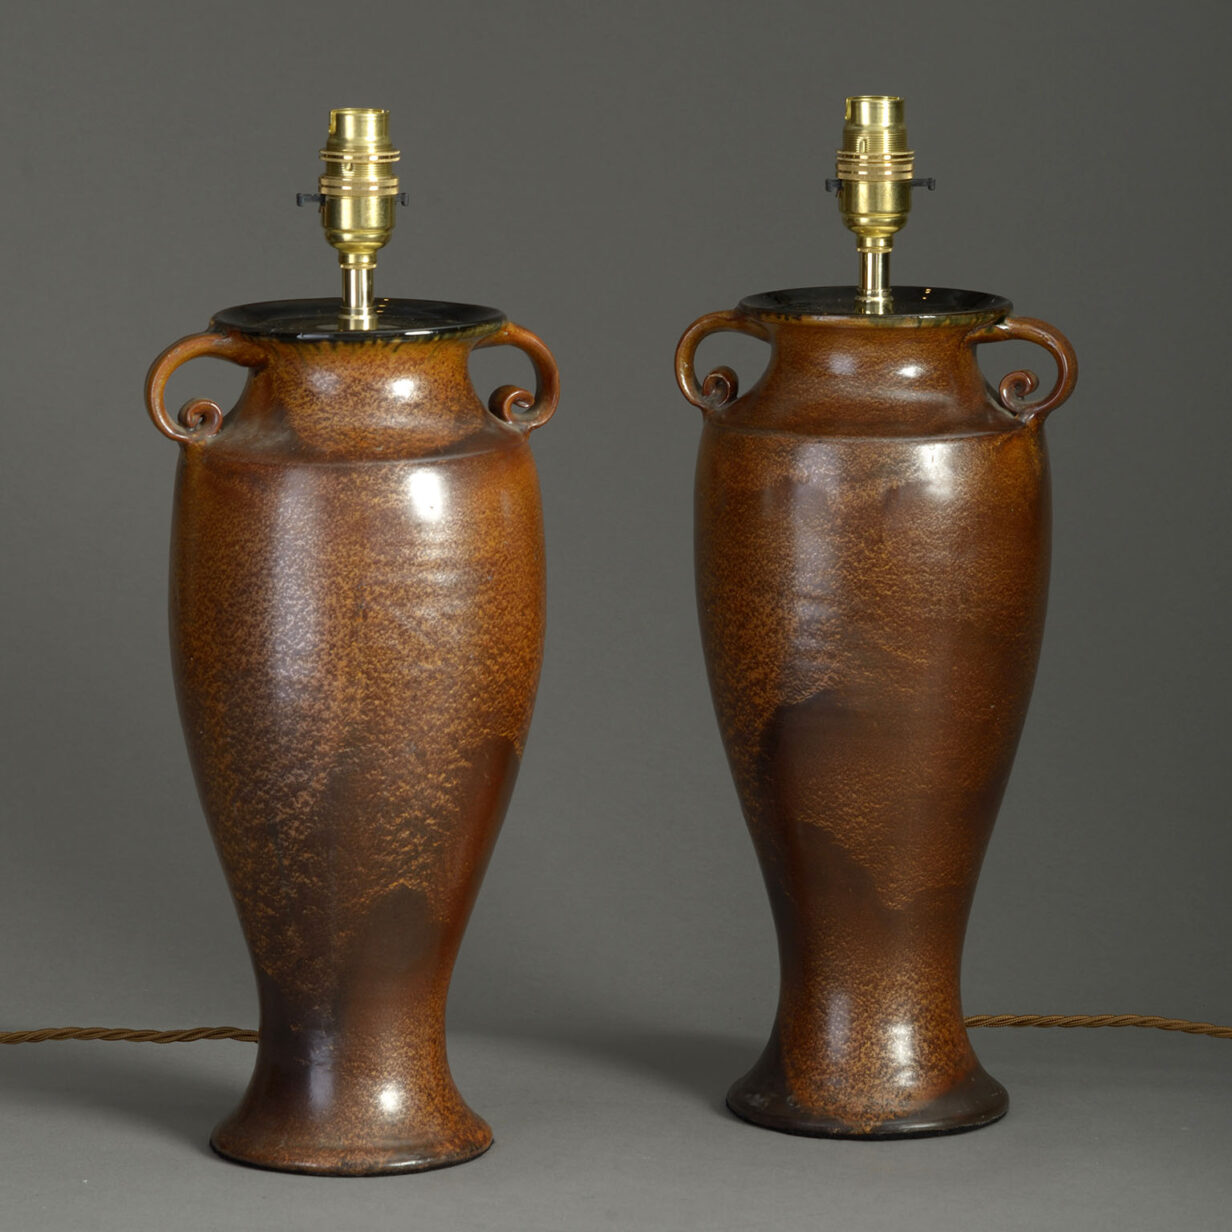 Pair of early 20th century art deco period vase lamps